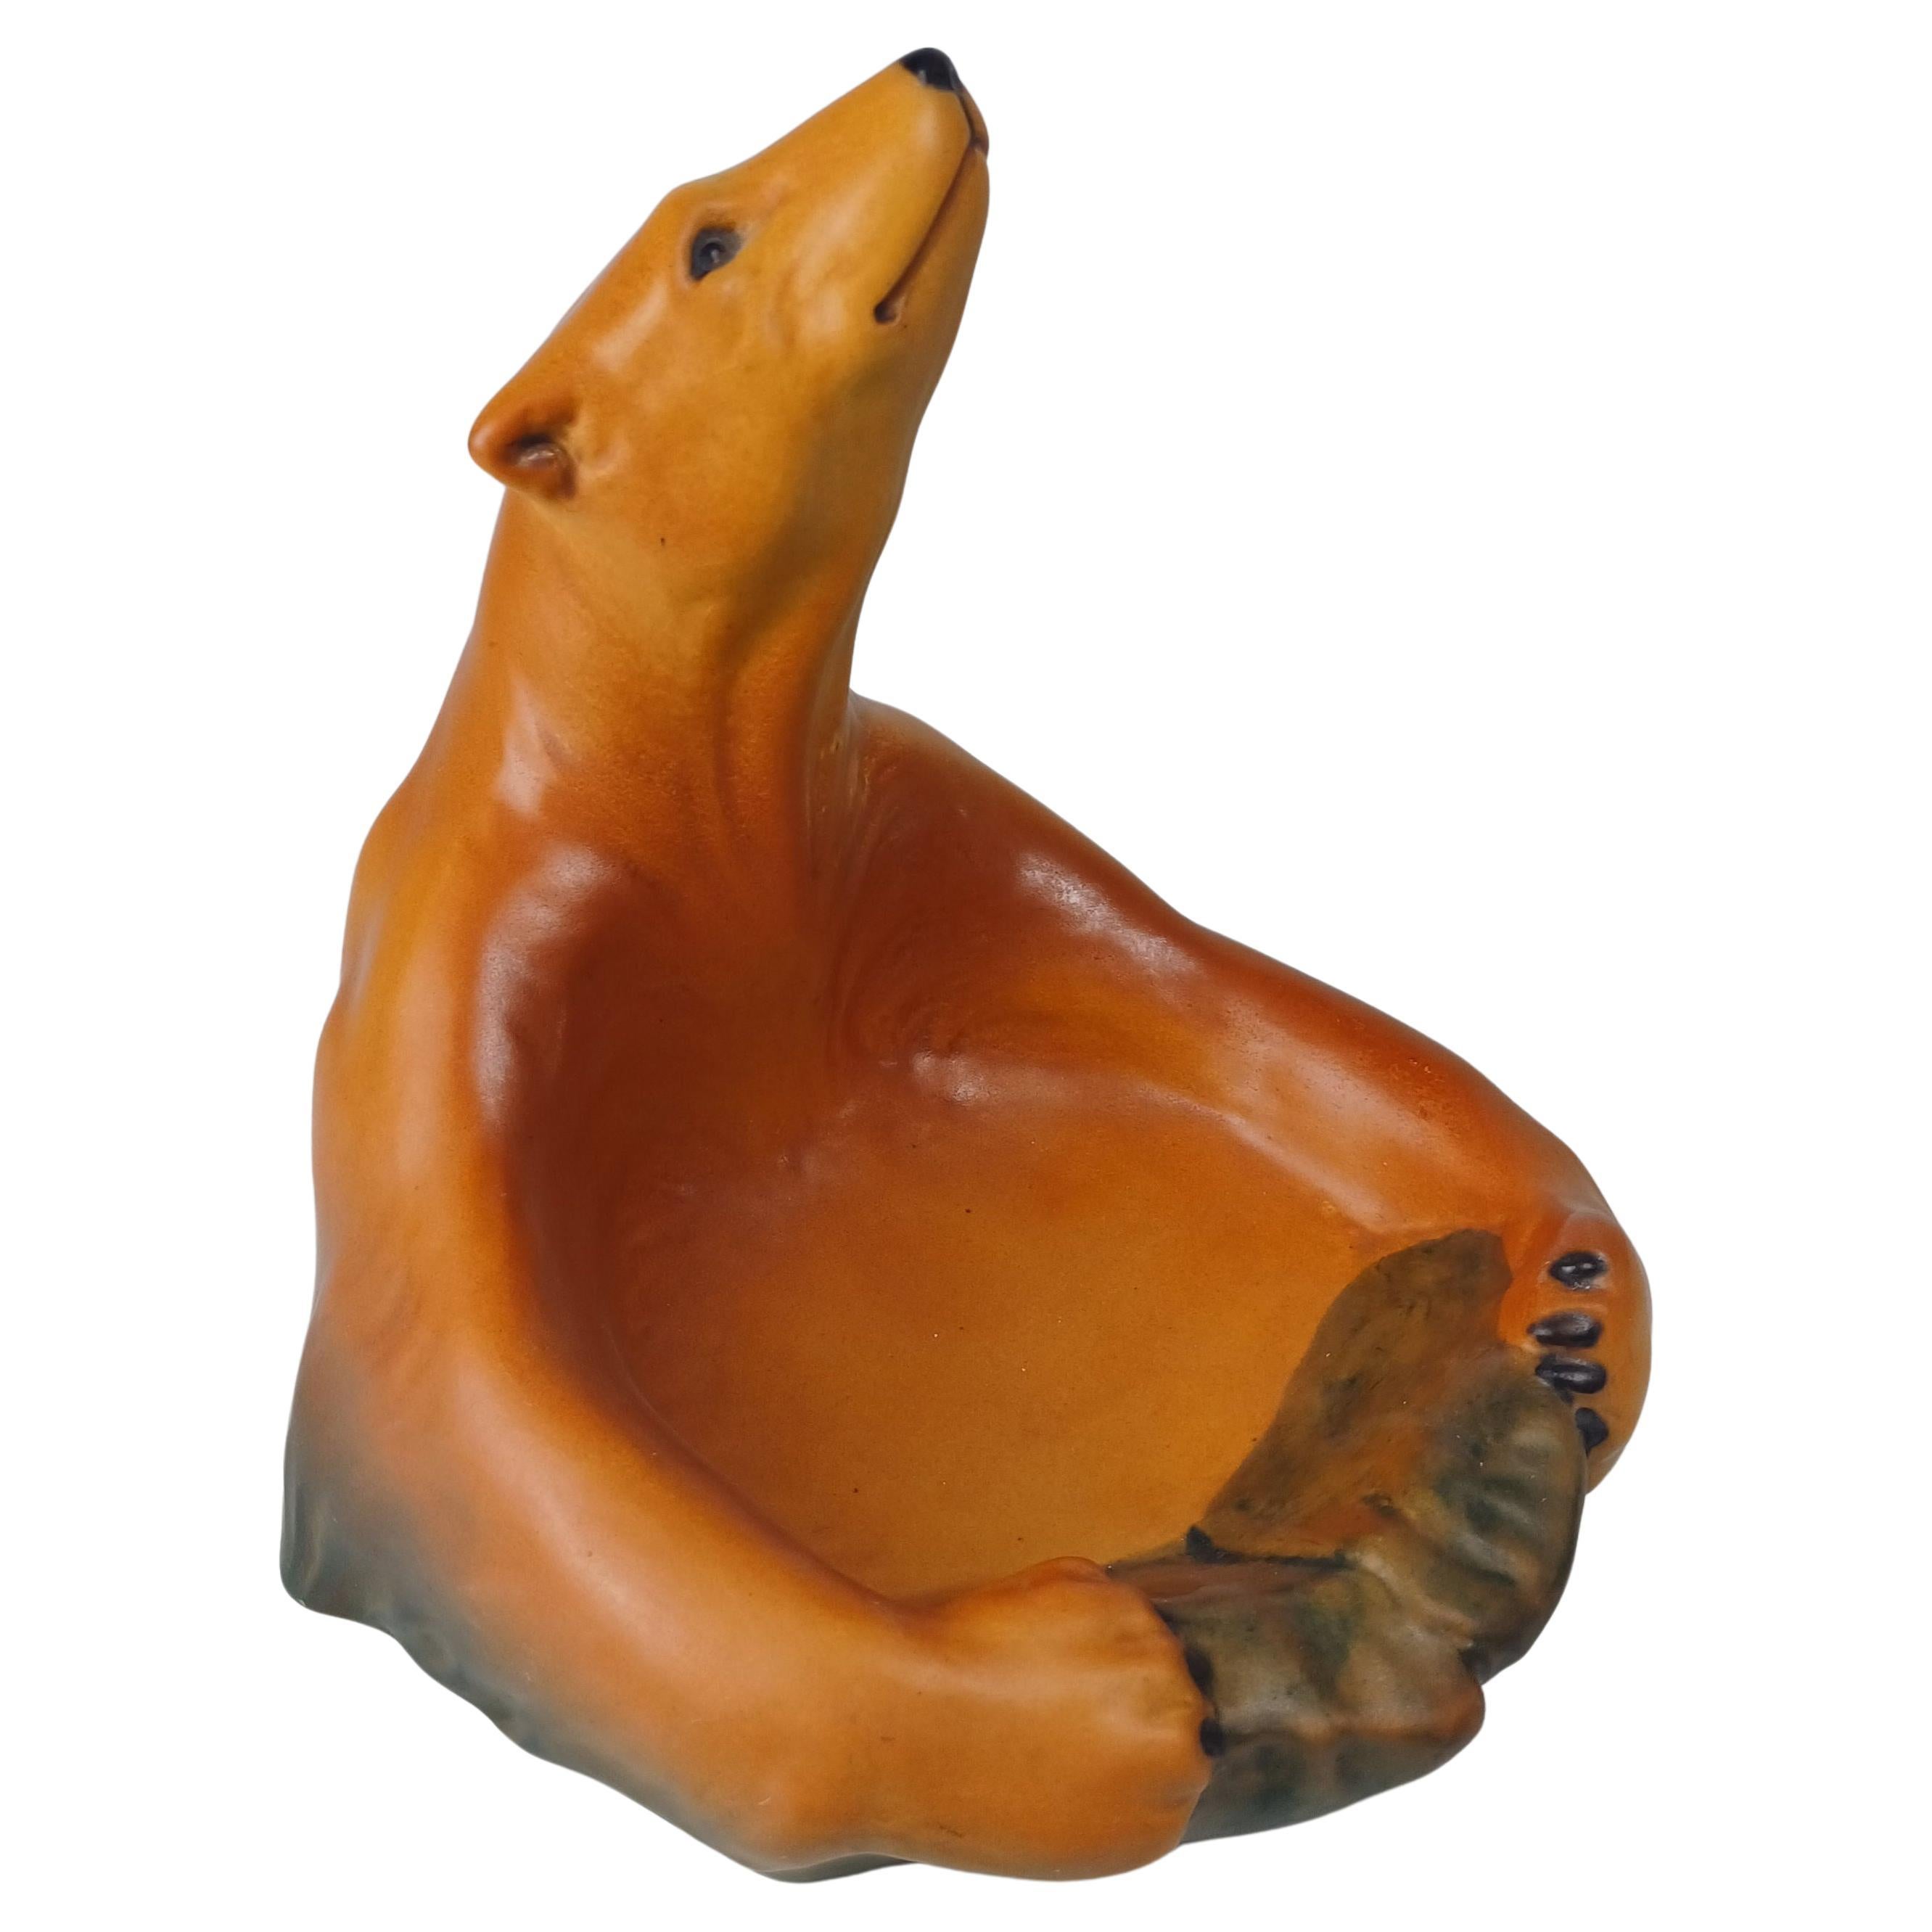 1920's Danish Art Nouveau Handcrafted Icebear Bowl - Ash Tray by P. Ipsens Enke For Sale